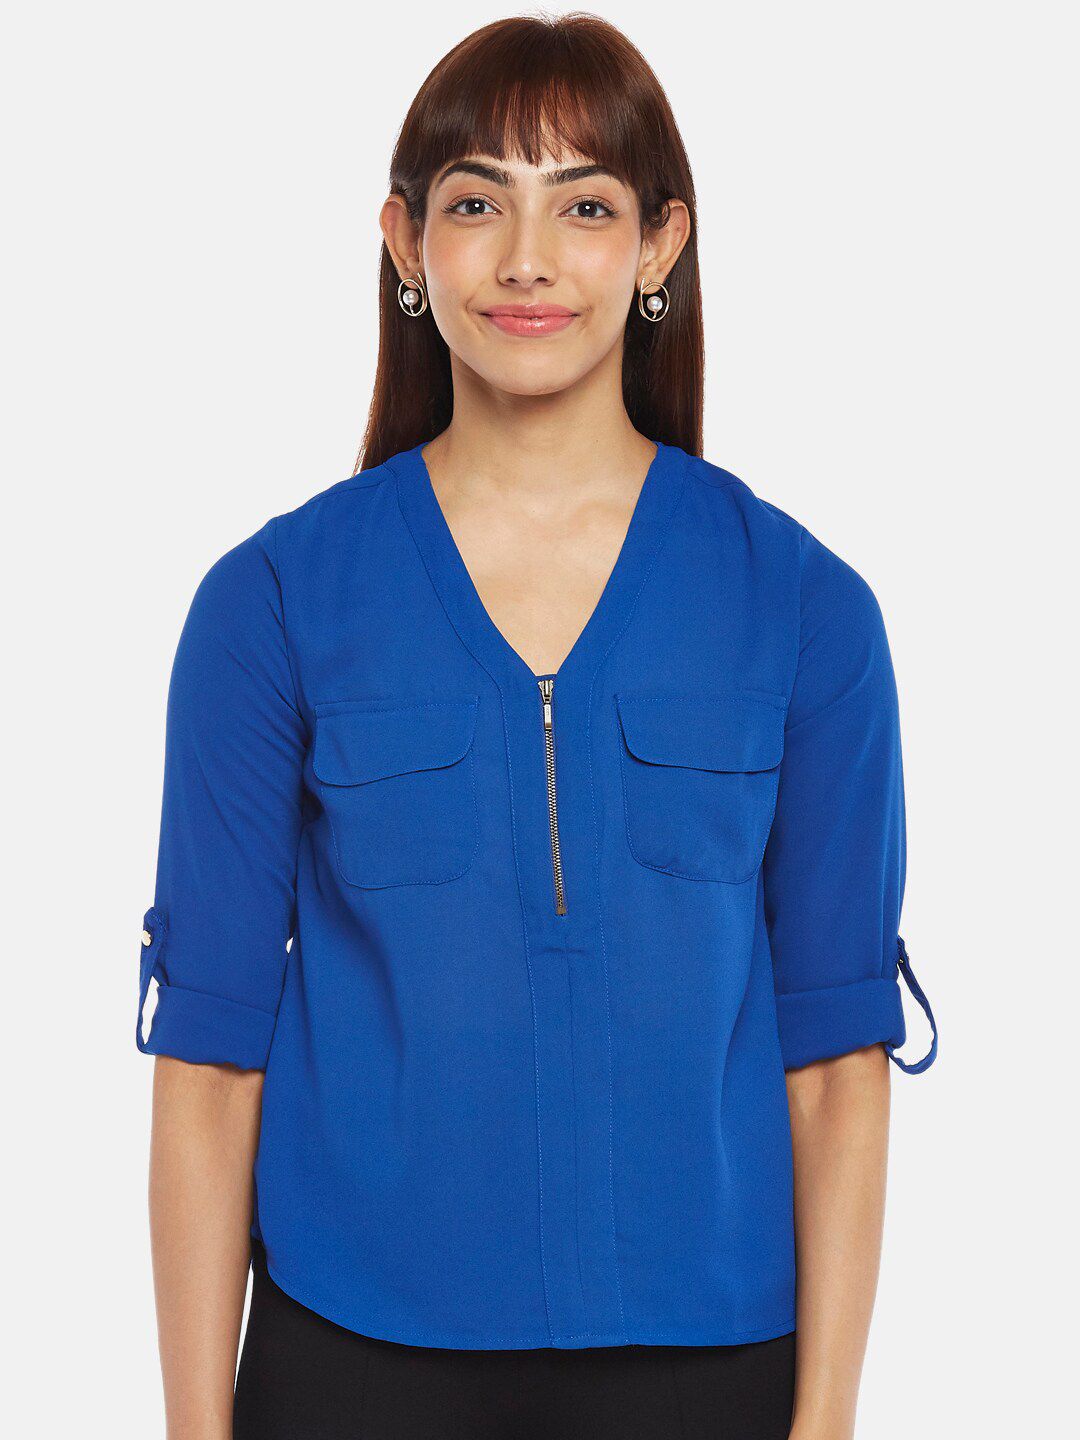 Annabelle by Pantaloons Blue Roll-Up Sleeves Top Price in India